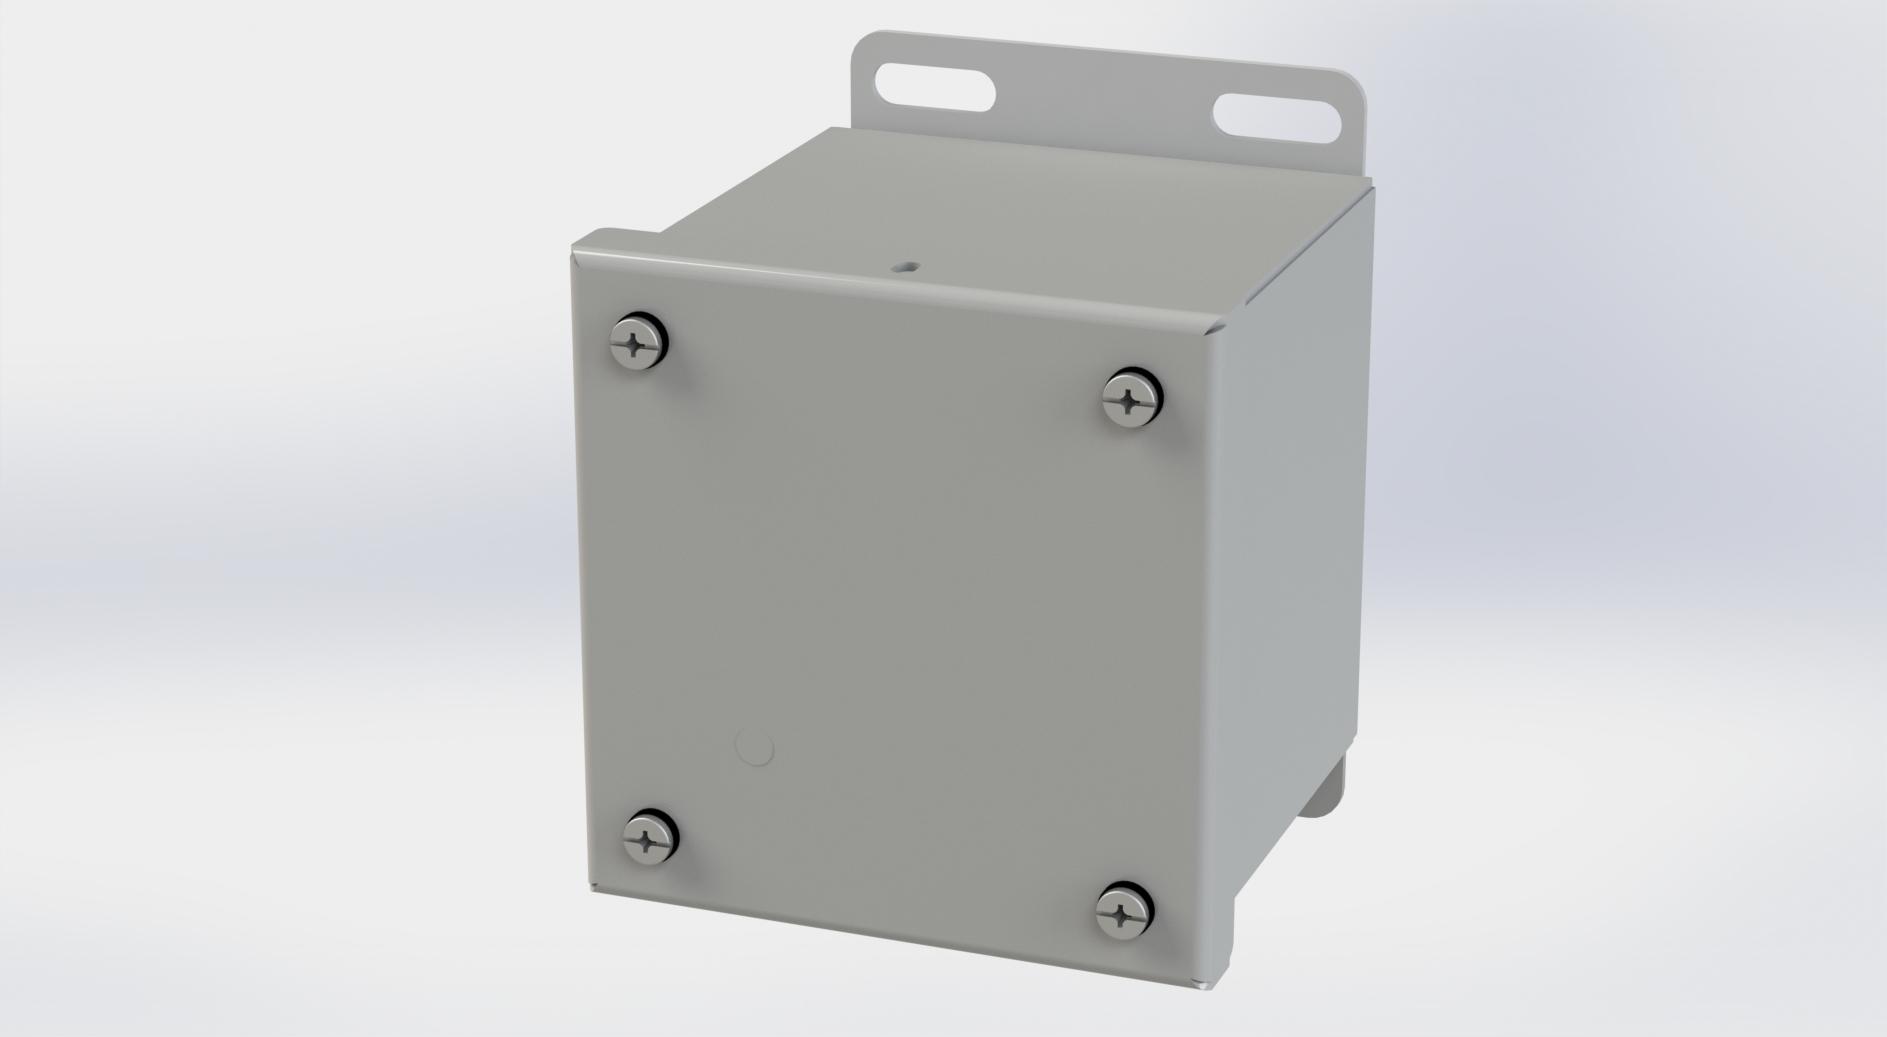 Saginaw Control SCE-4044SC SC Enclosure, Height:4.13", Width:4.00", Depth:4.00", ANSI-61 gray powder coating inside and out.  Optional sub-panels are powder coated white.